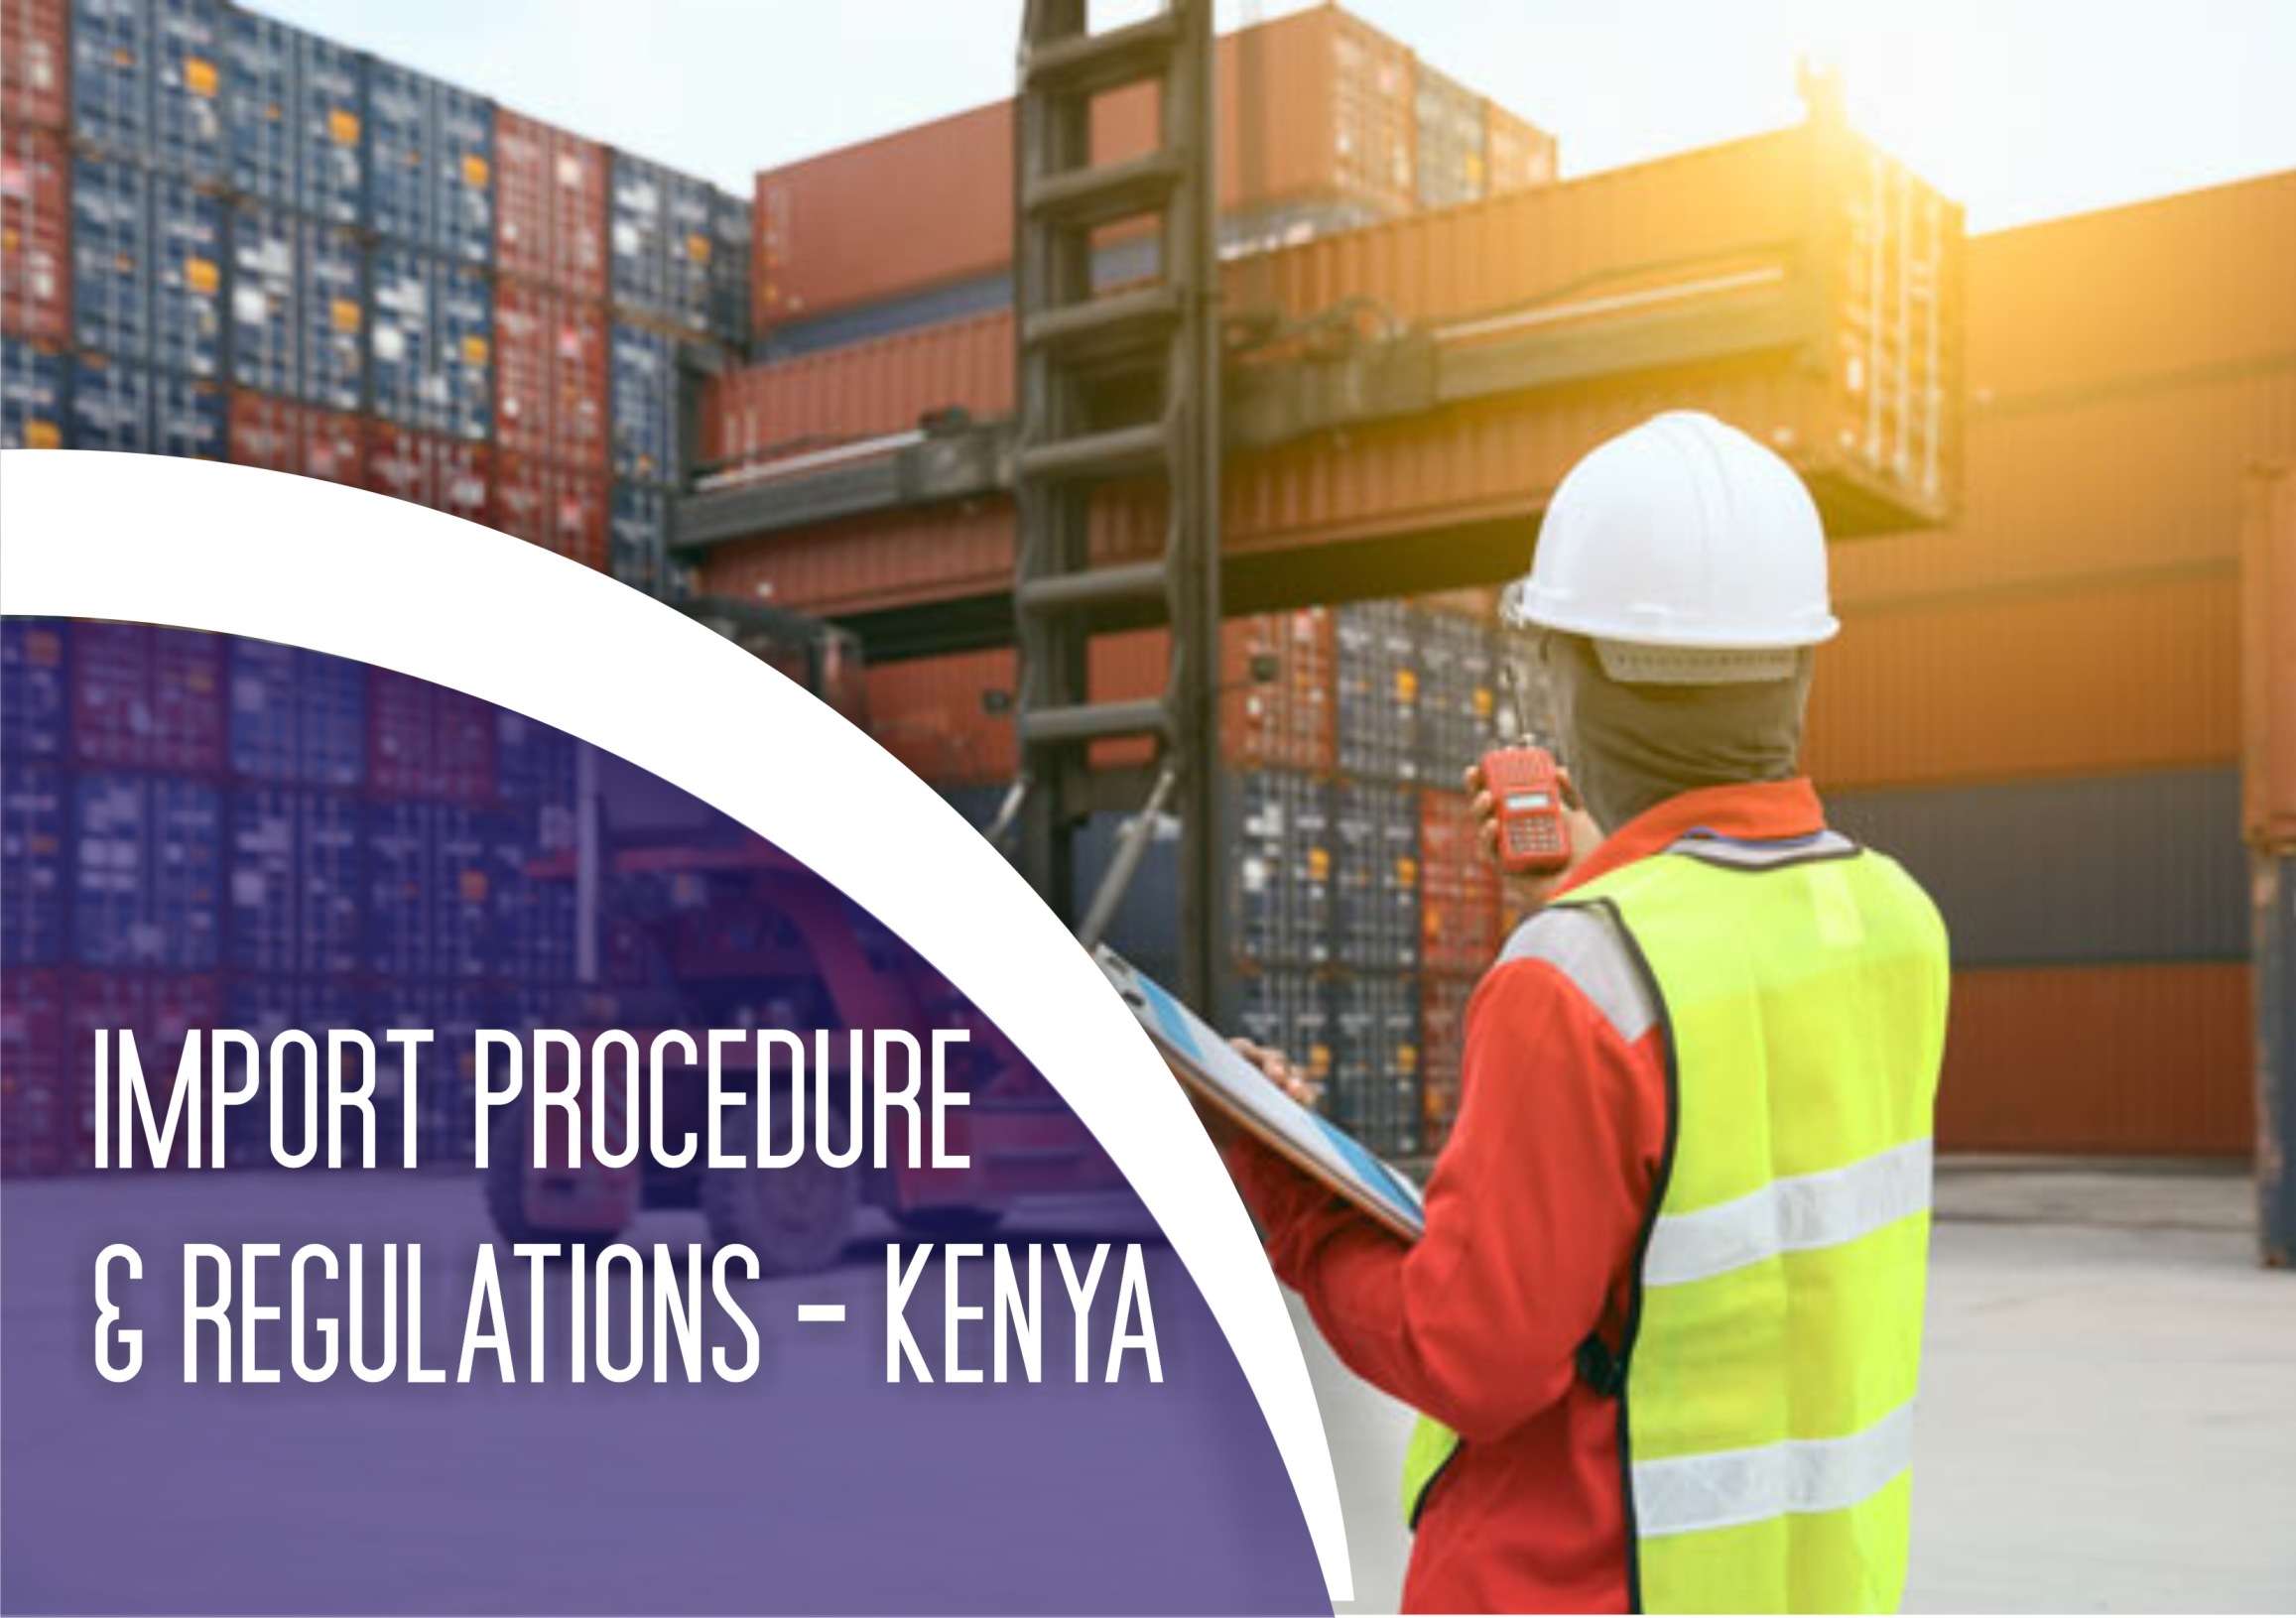 How to Export or Import to Kenya